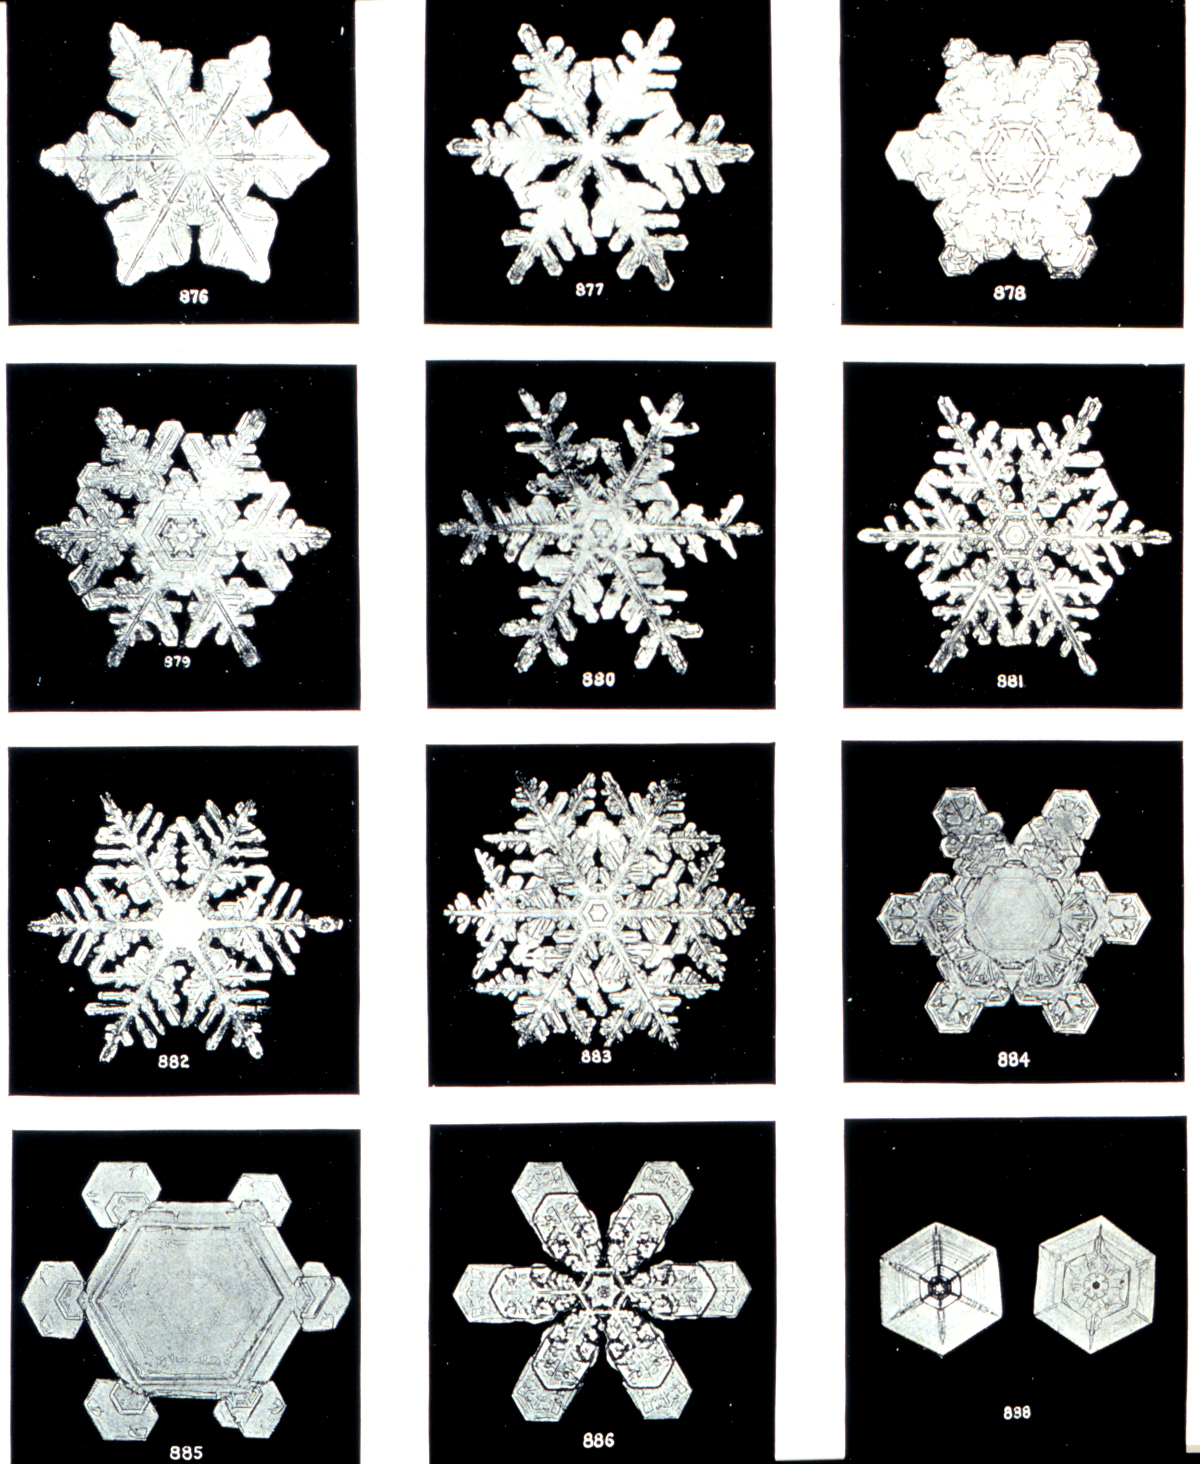 Why do snowflakes look like that? And other mysteries of nature's patterns